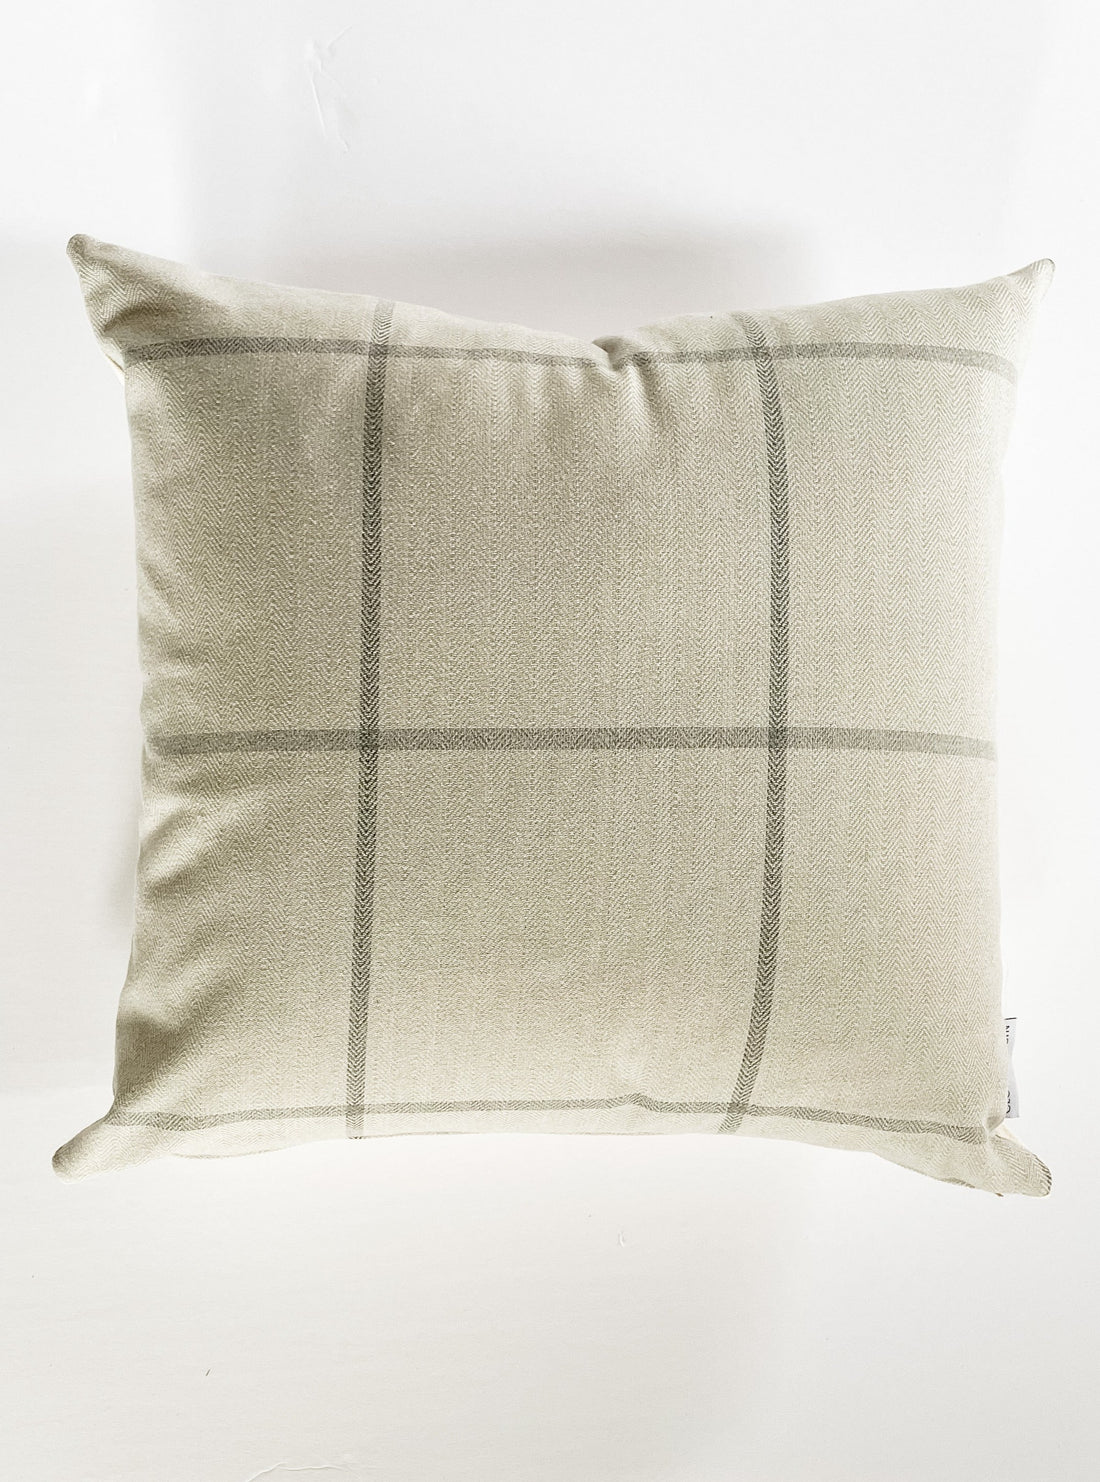 C+C Worsted Plaid Pillow Cover